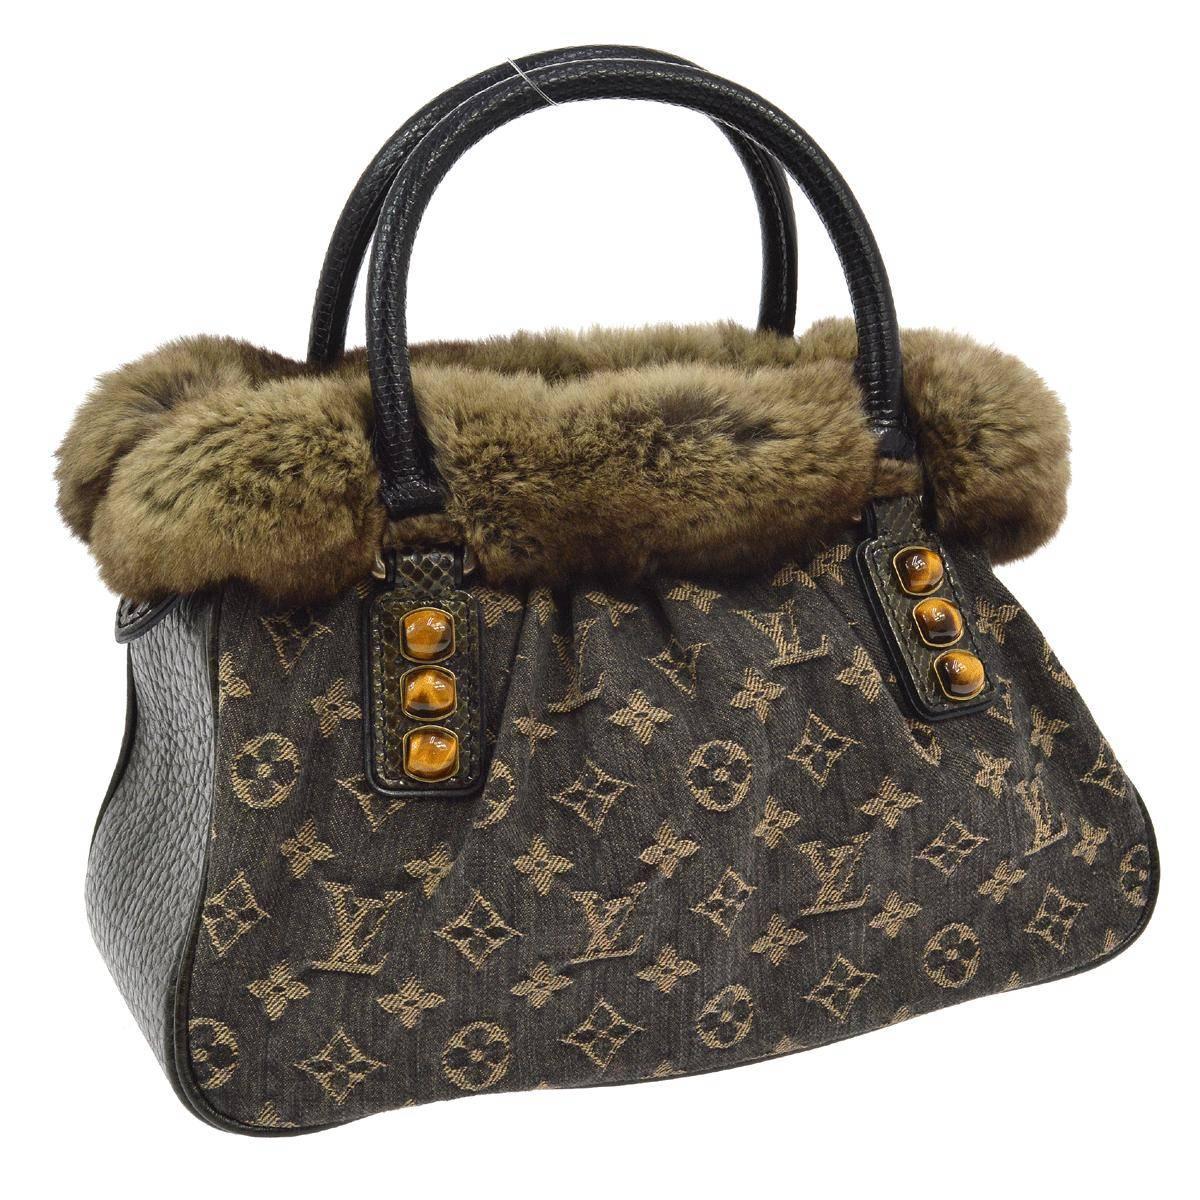 CURATOR'S NOTES

Louis Vuitton Limited Edition Brown Monogram Fur Top Handle Evening Satchel Bag 

Monogram fabric
Fur
Lizard trim
Tiger's eye cabochon stones
Satin lining
Made in France
Date code AS 0075
Handle drop 4"
Measures 12.5" W x